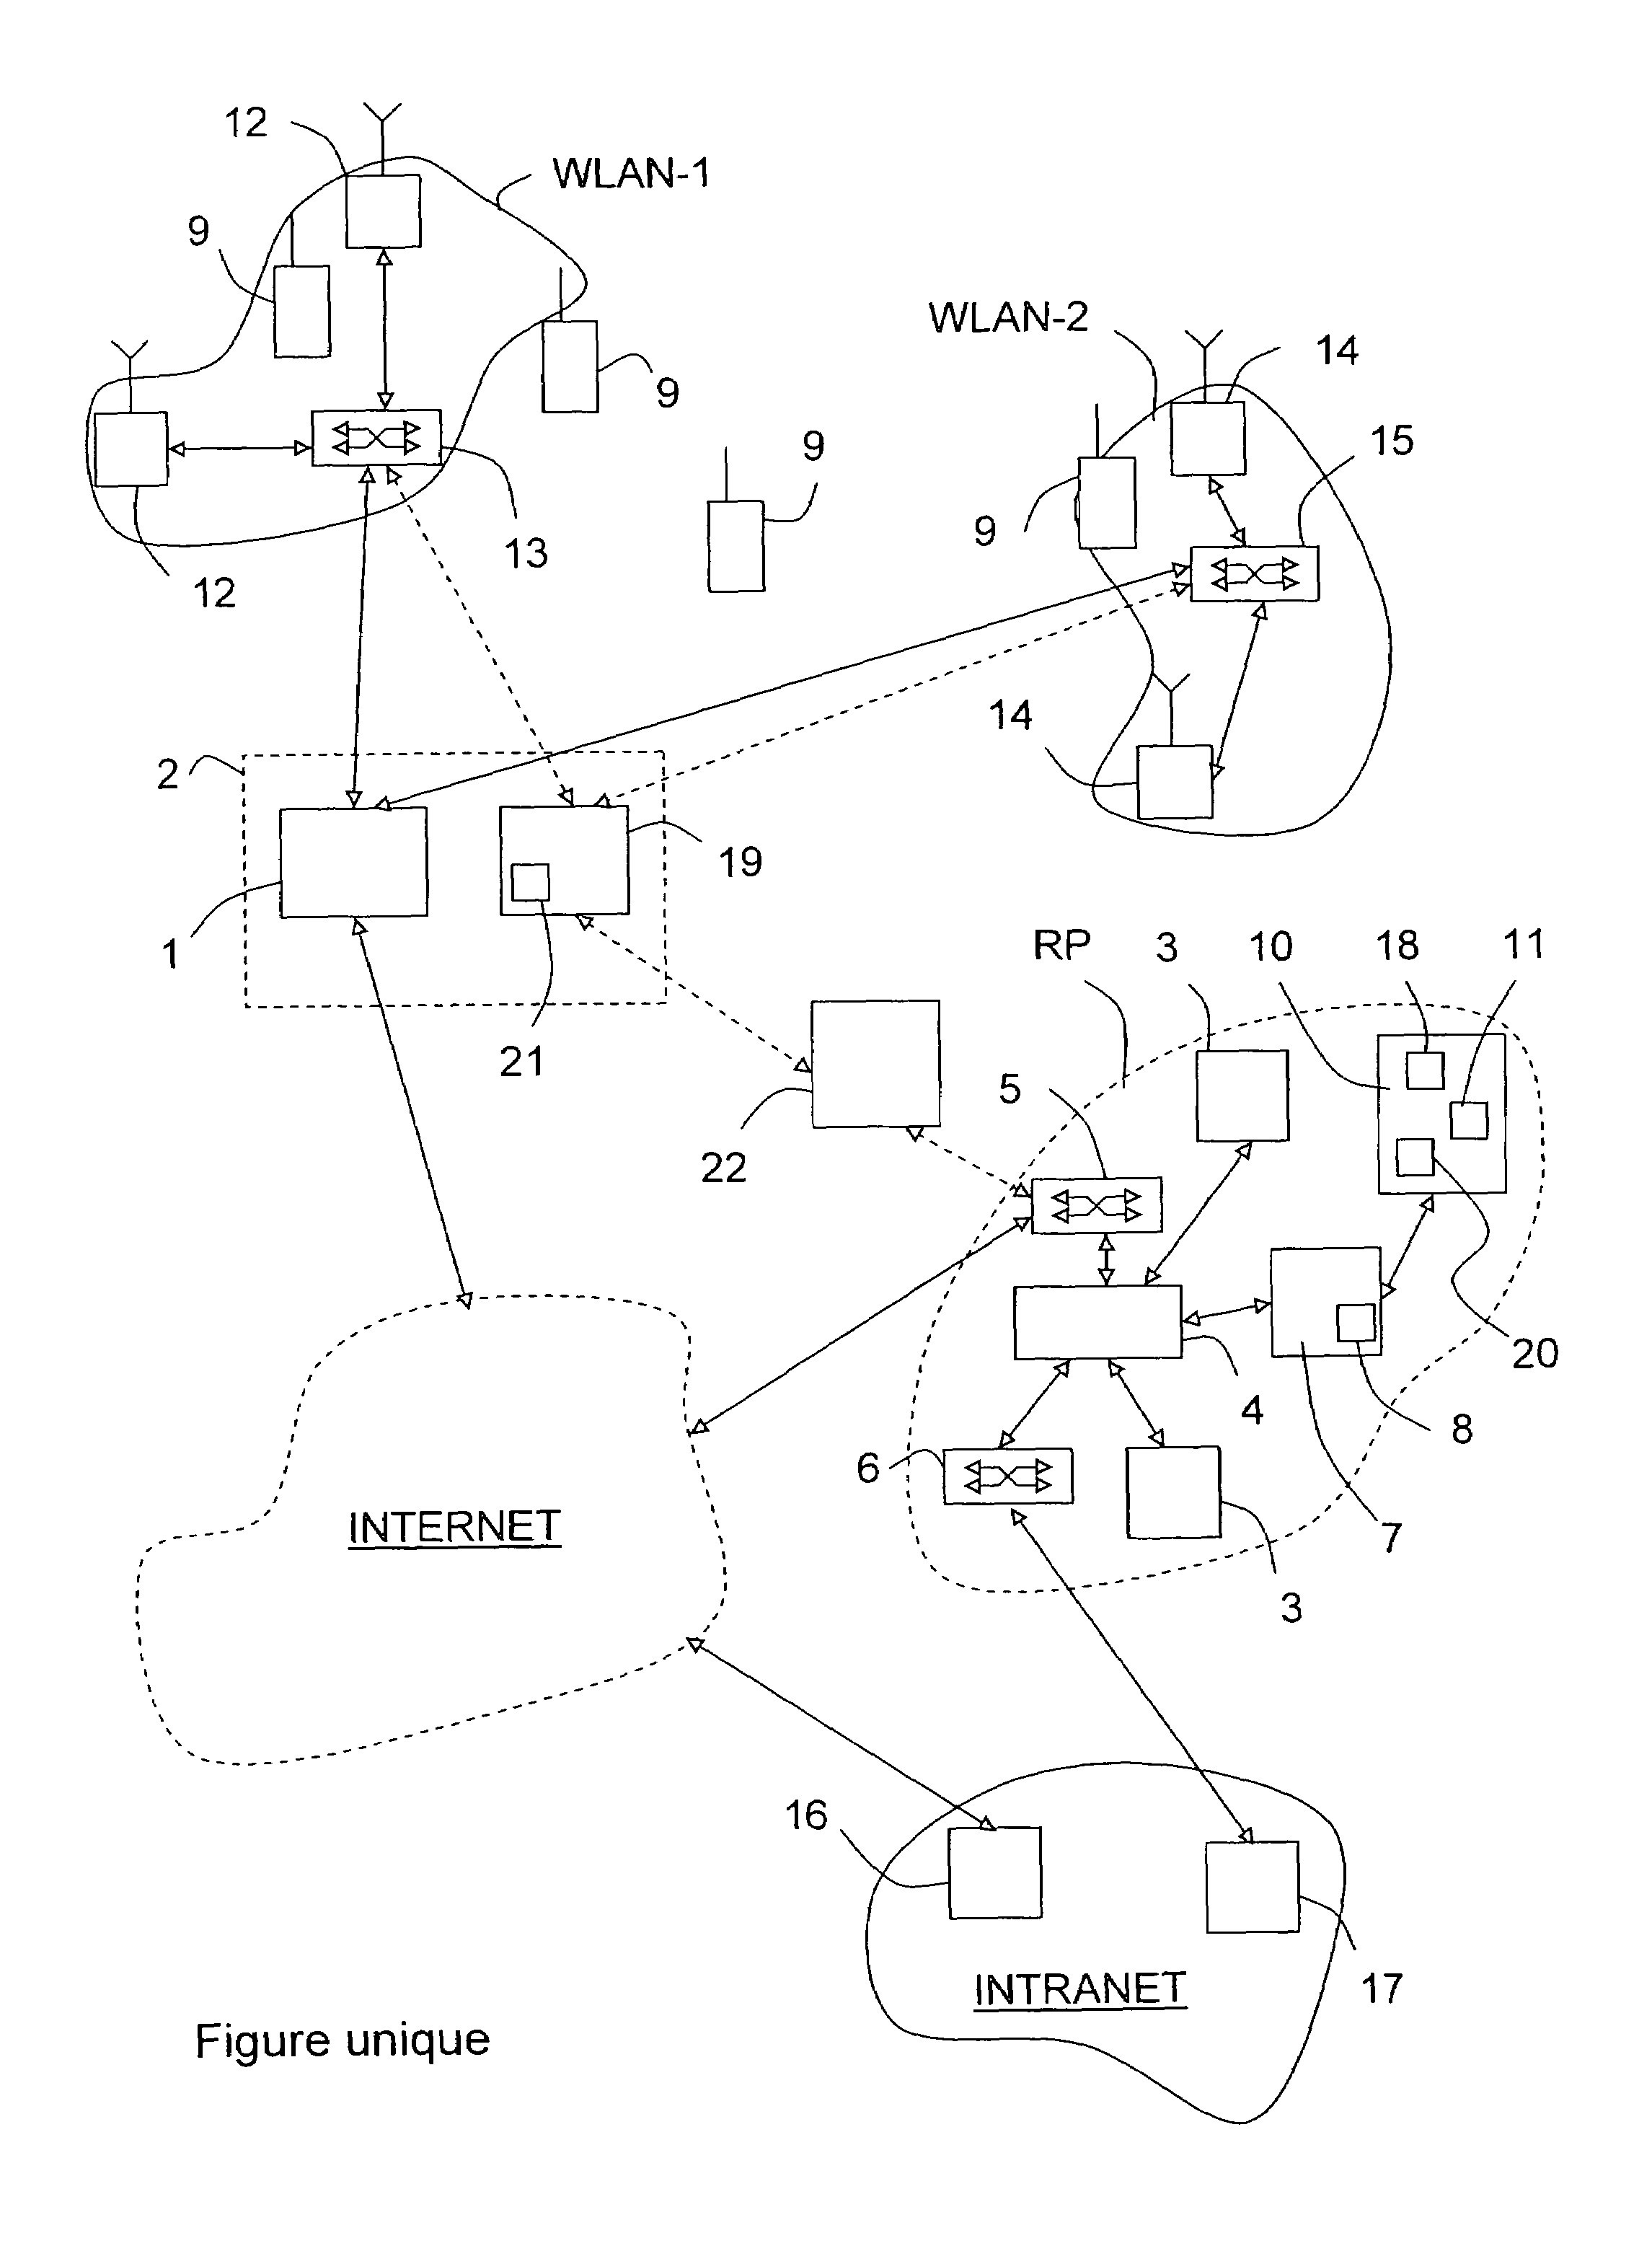 Method and device for access control to a wireless local access network